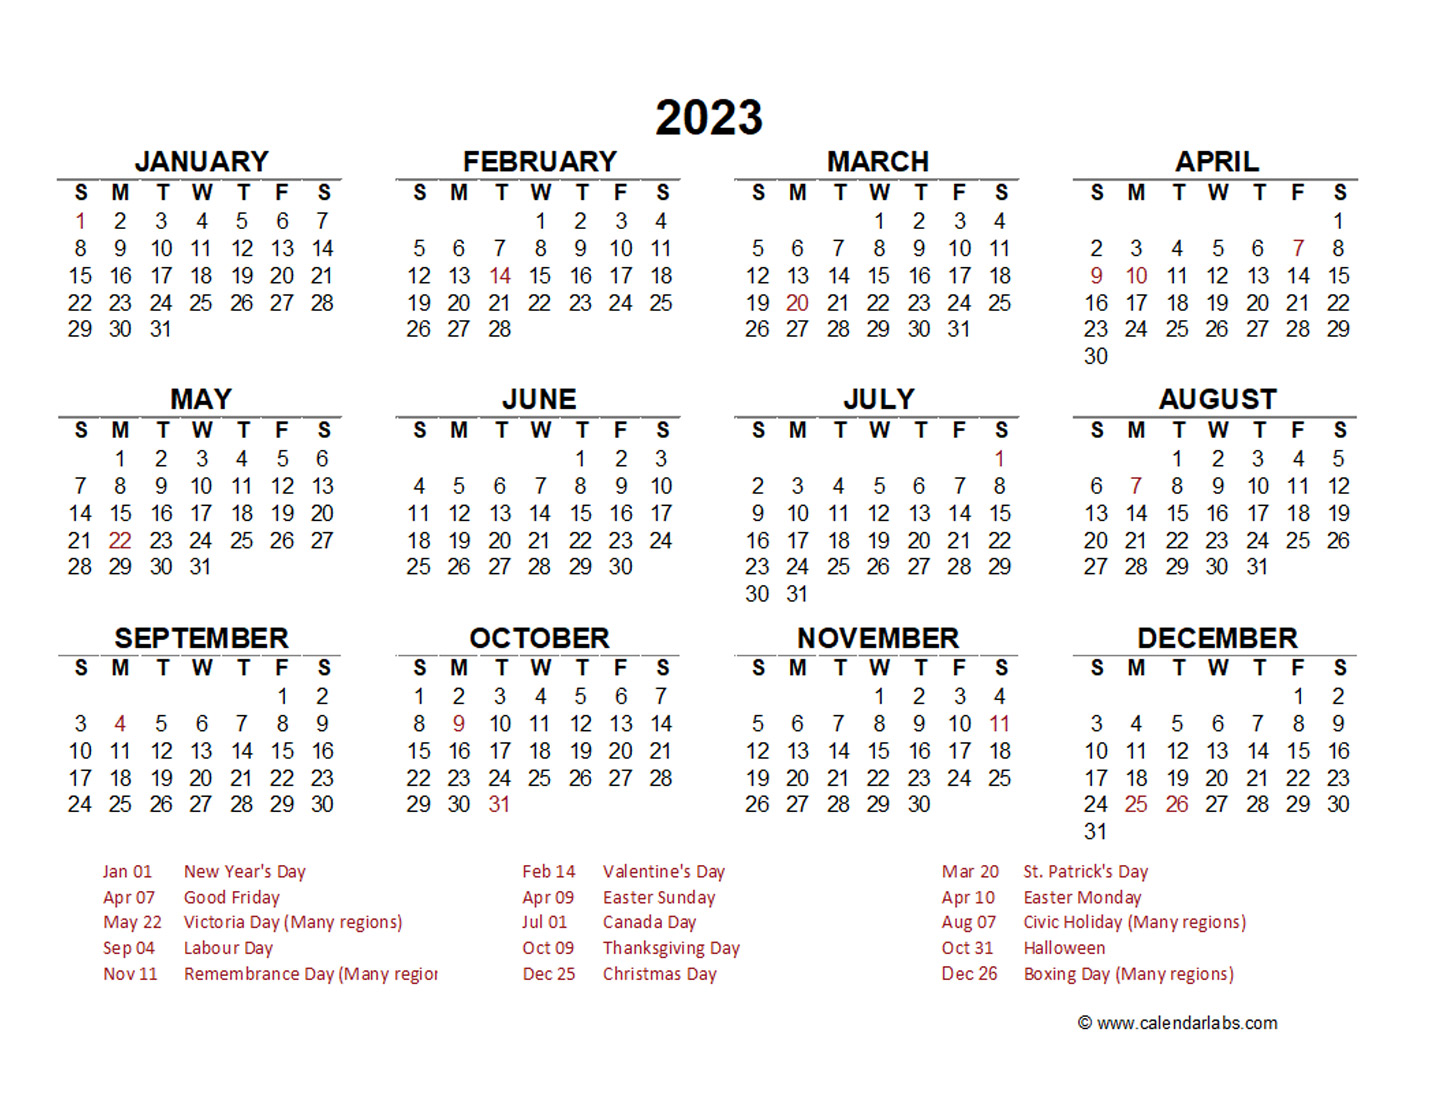 2023 Calendar With Canada Holidays At Bottom Landscape Layout